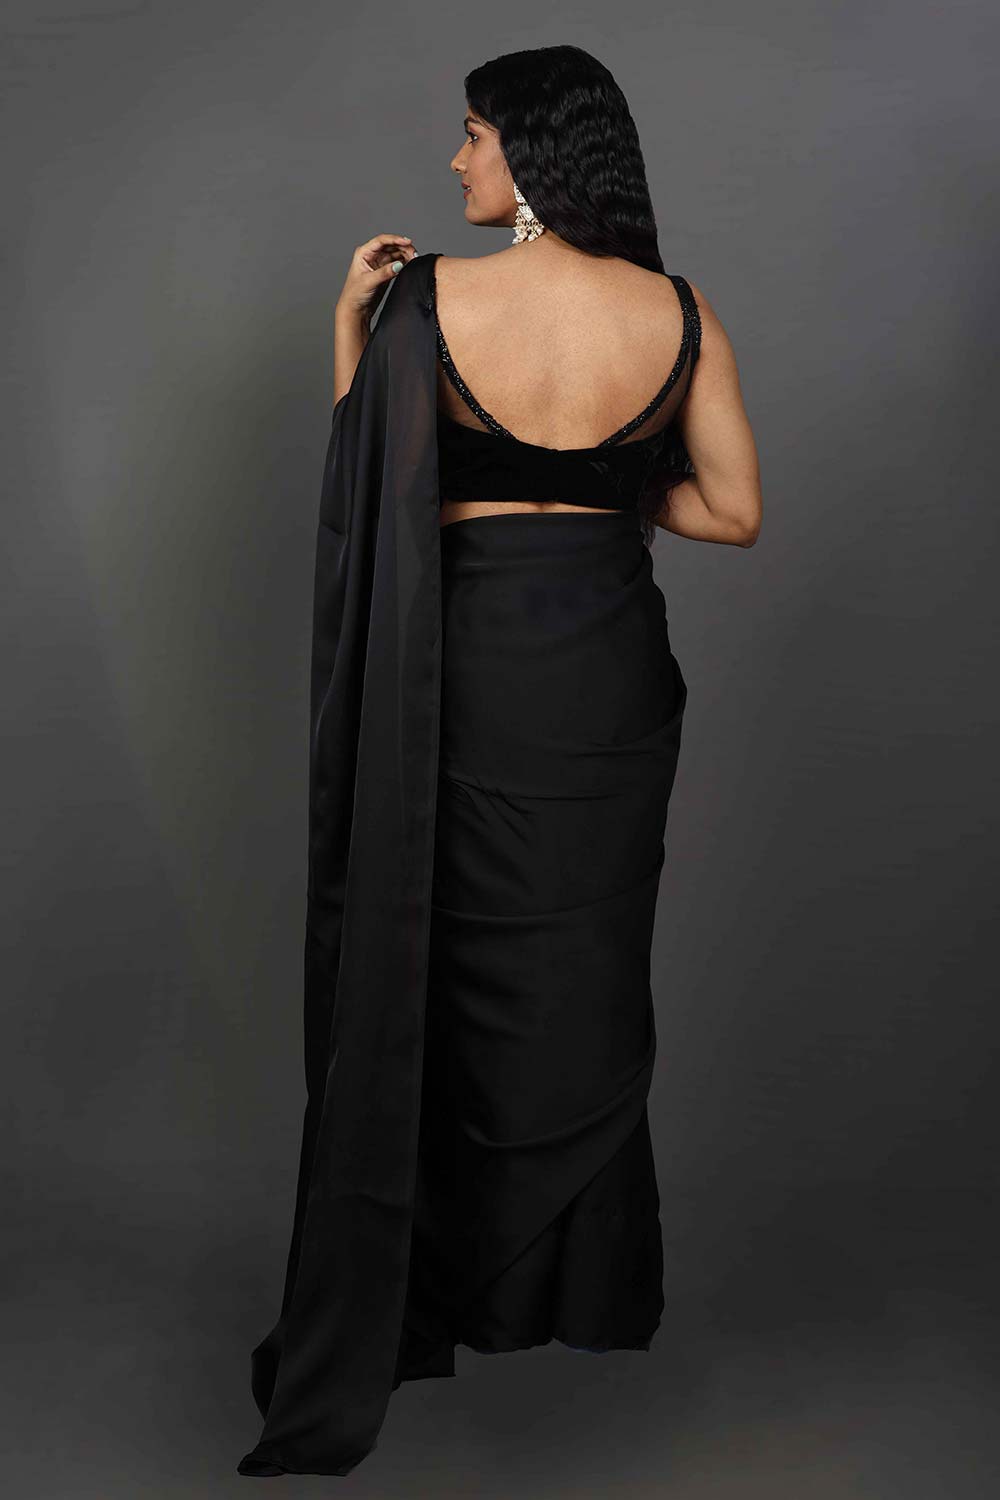 Shop Maya Black Satin One Minute Saree at best offer at our  Store - One Minute Saree